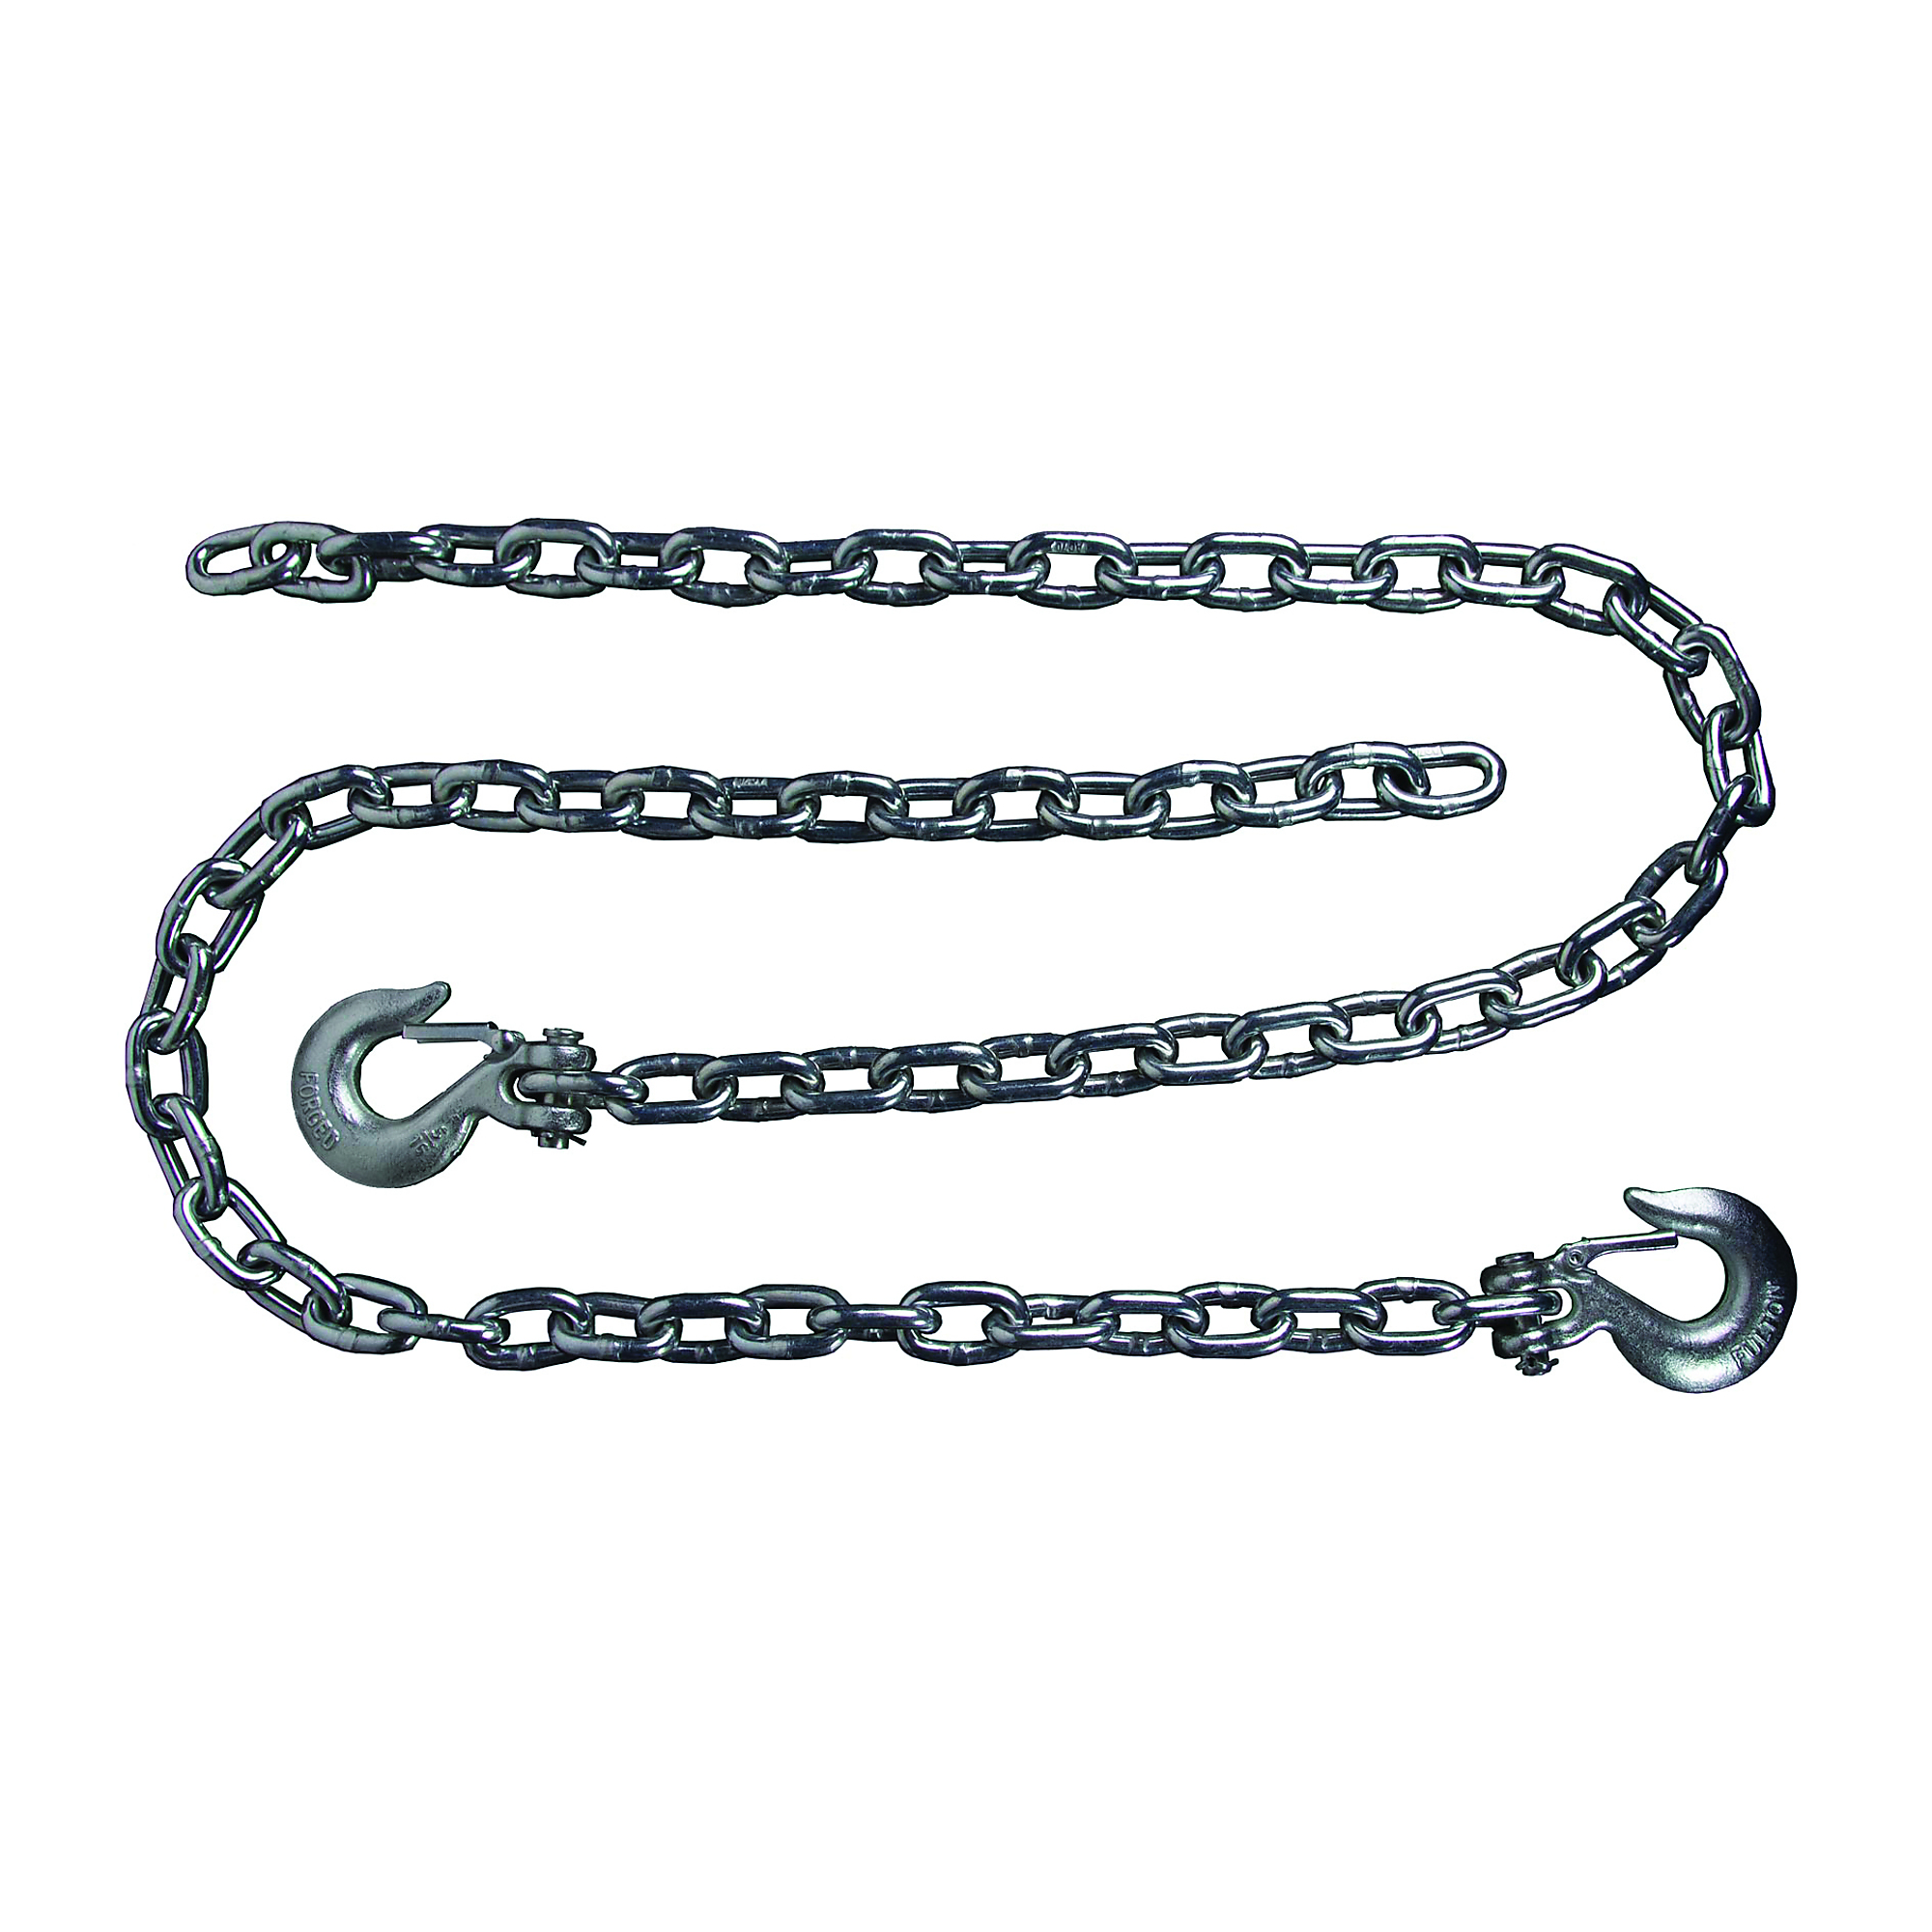 BulletProof Hitches, HEAVY DUTY 3/8Inch SAFETY CHAINS (PAIR), Fits Receiver Size Multiple in, Model HDCHAINS